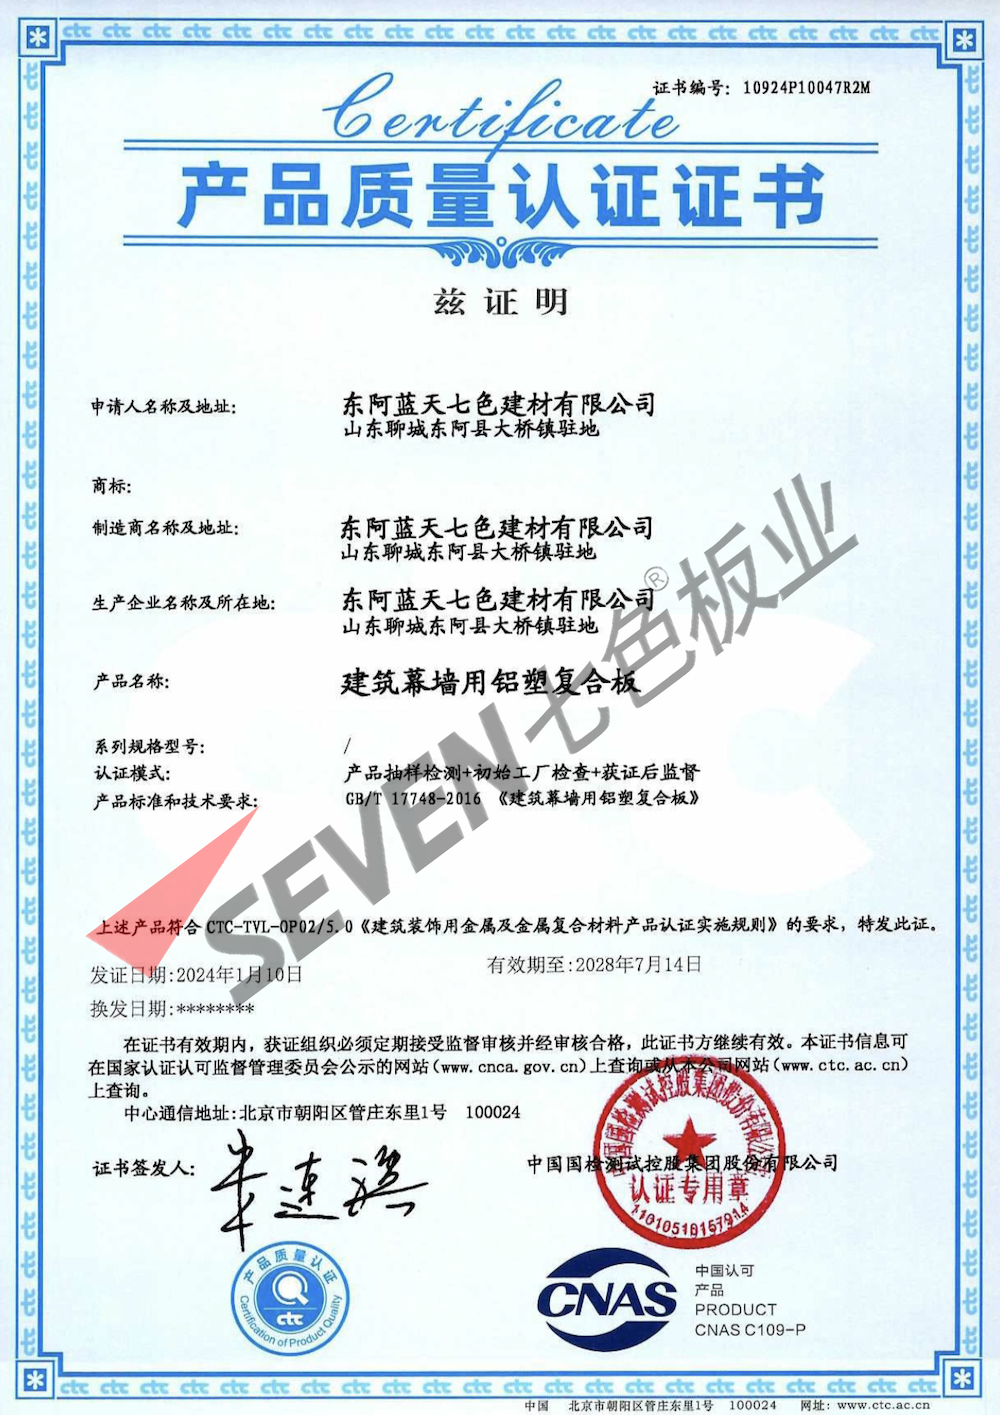 Quality certification certificate for aluminum-plastic composite panels for building curtain walls in 2024